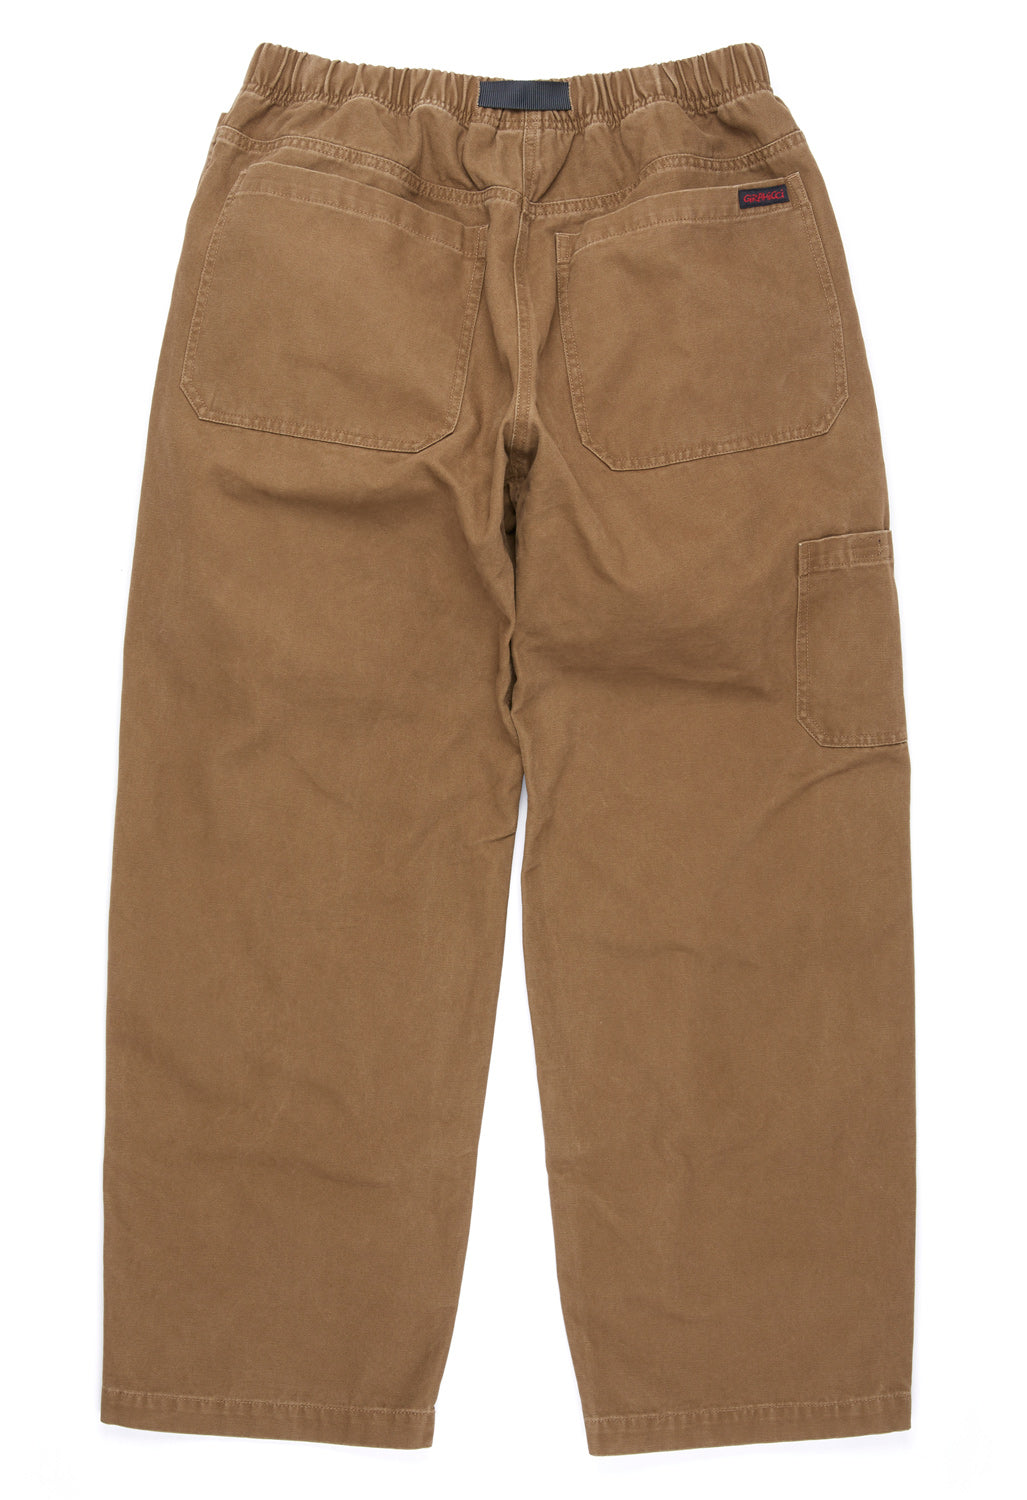 Gramicci Men's Canvas Double Knee Pants - Dusted Olive